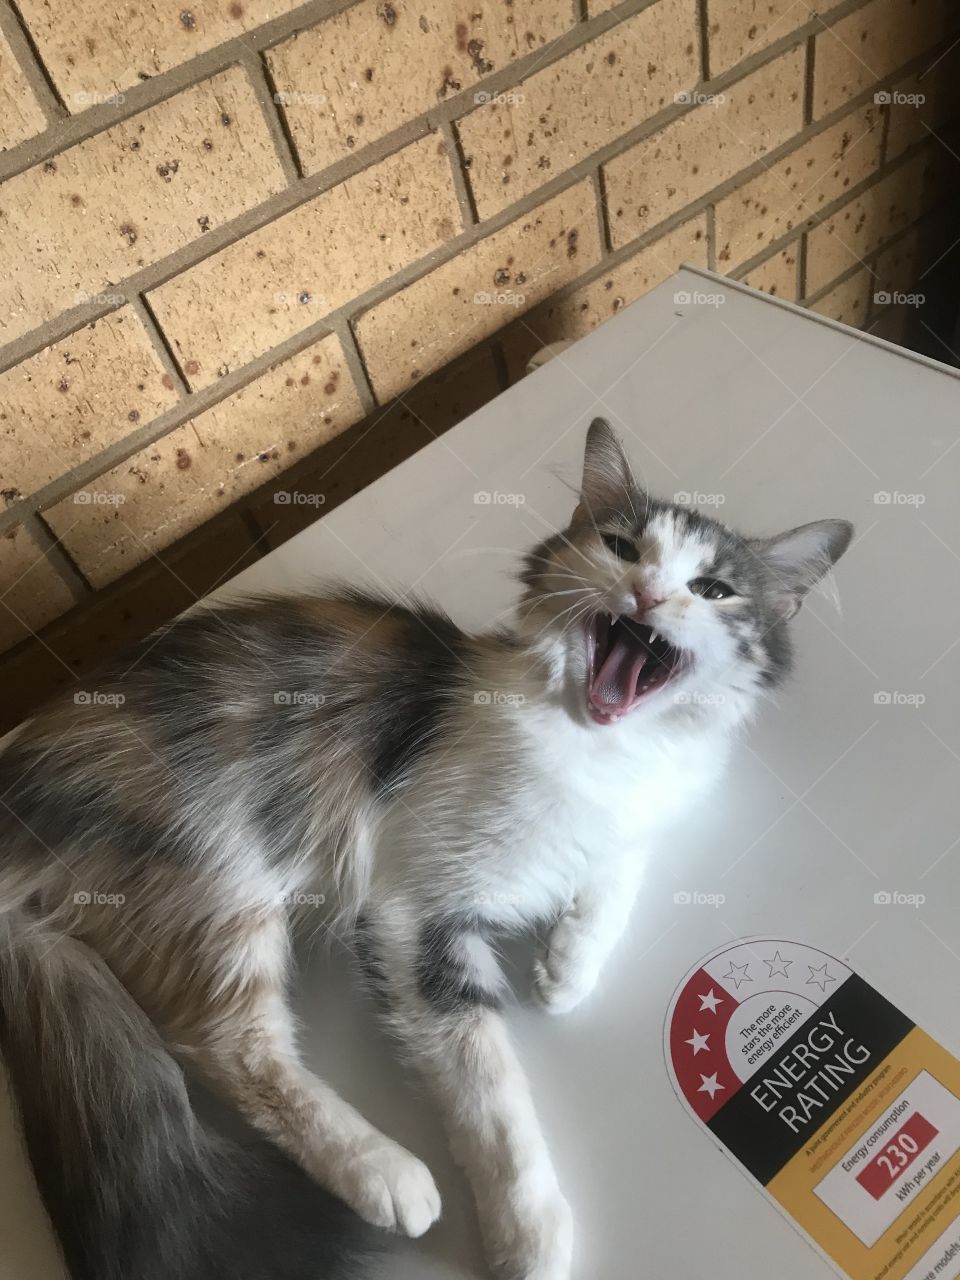 Caught her mid yawn, still cute though